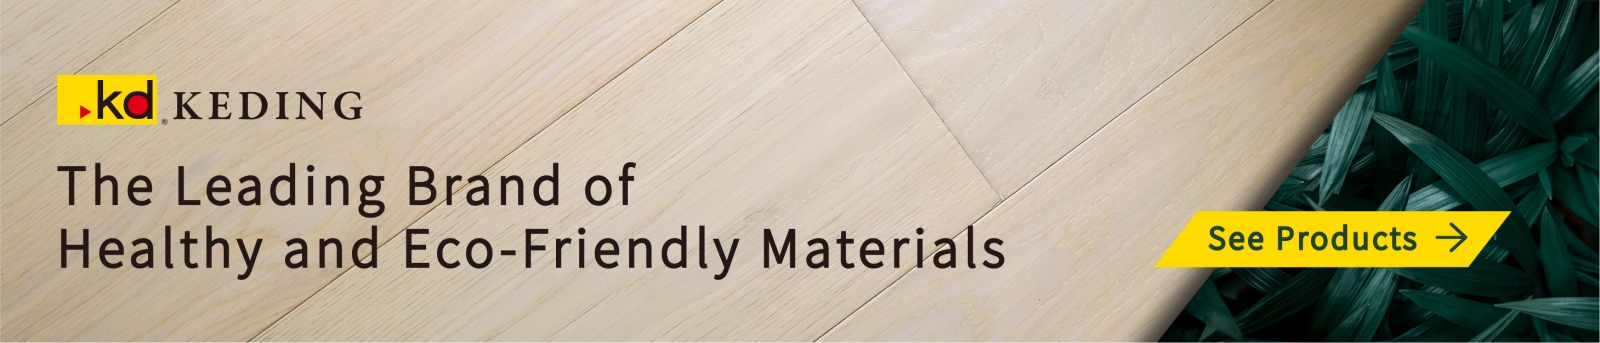 The Leading Brand of Healthy and Eco-Friendly Materials